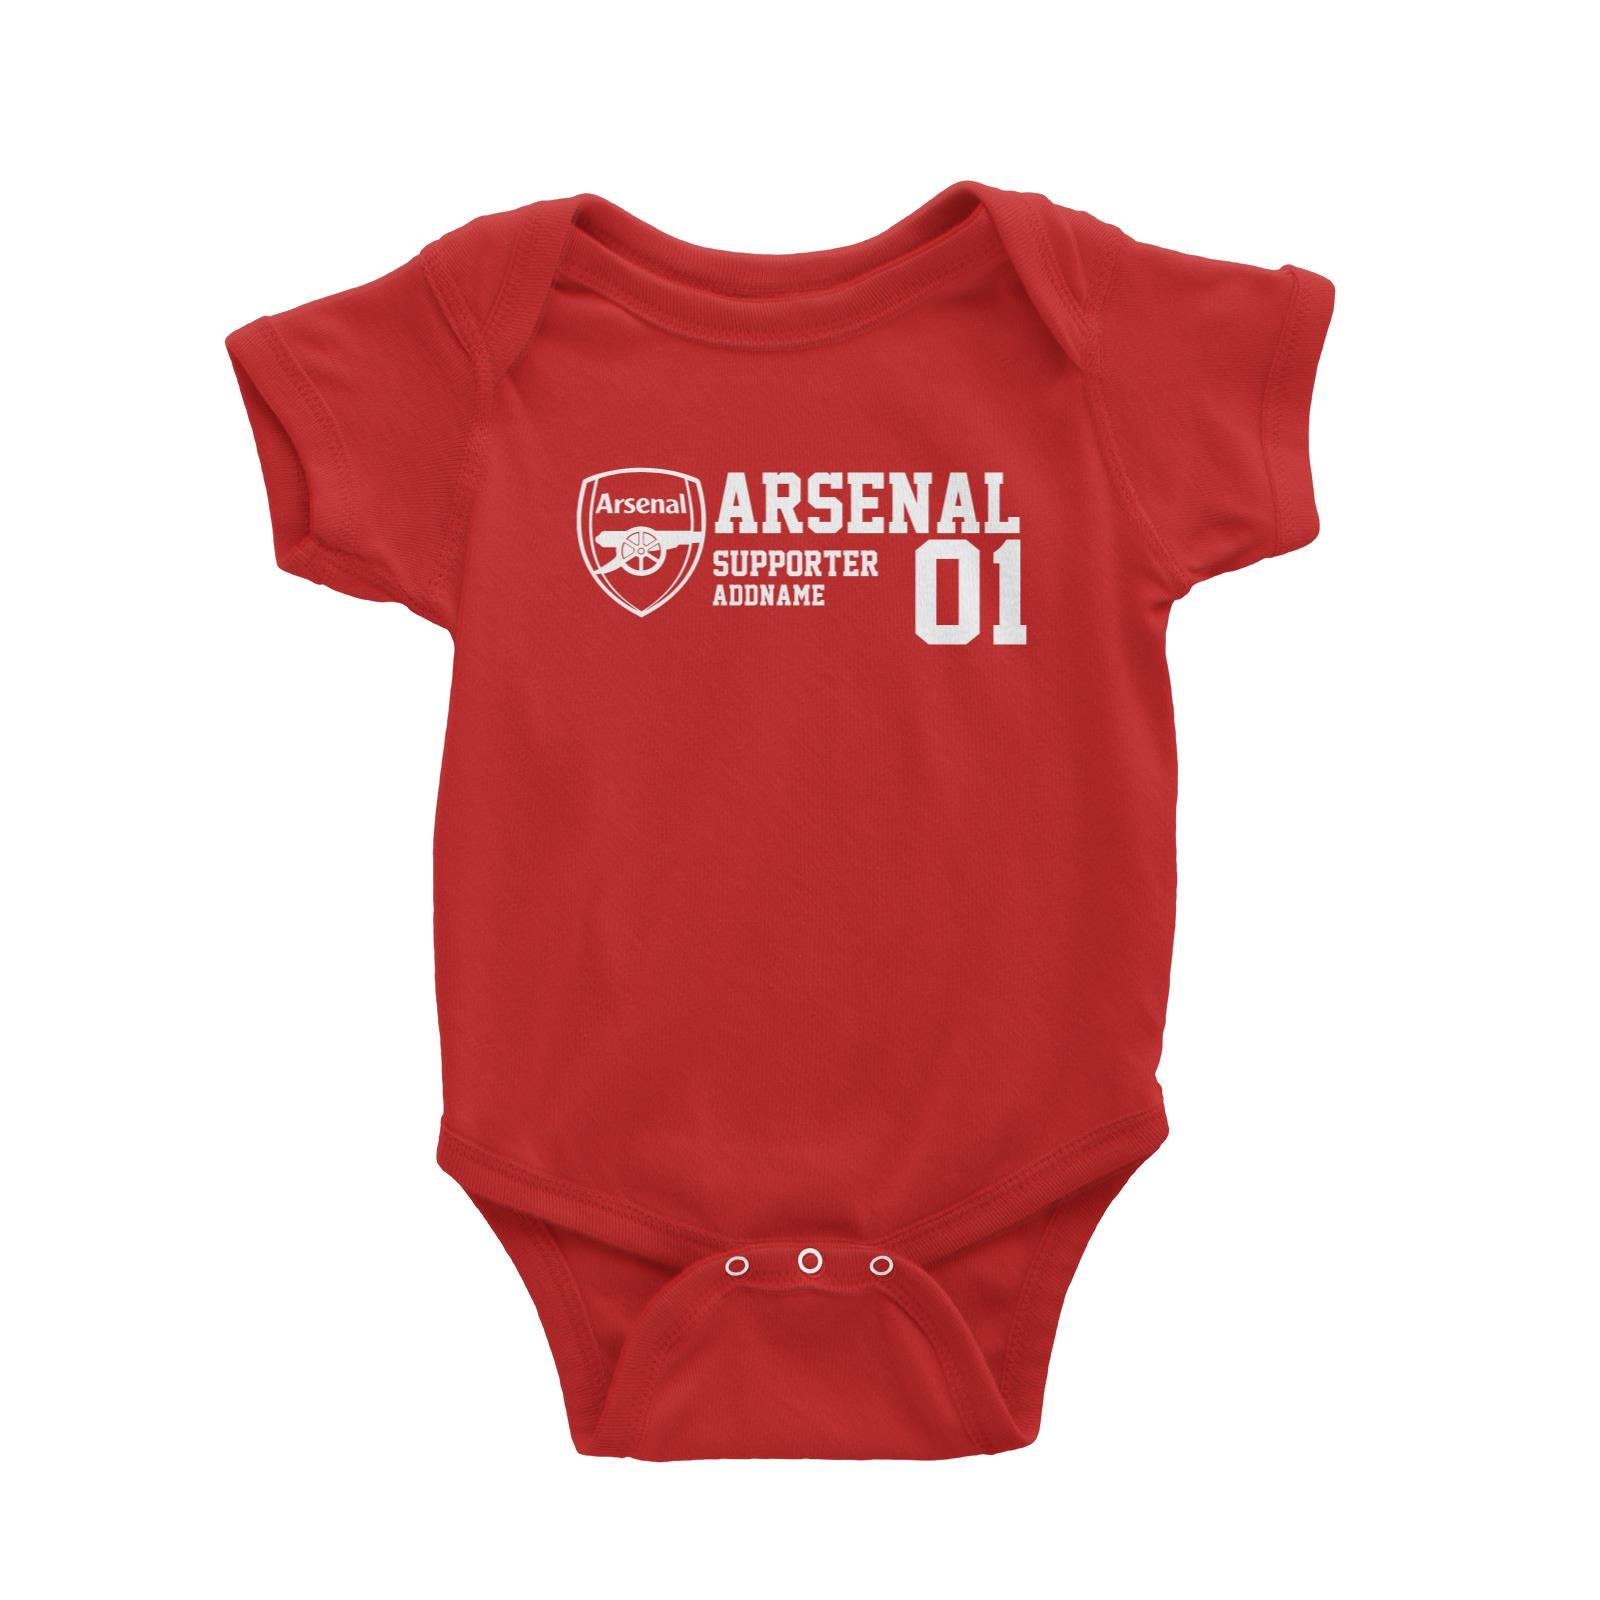 Arsenal Football Supporter Addname Baby Romper